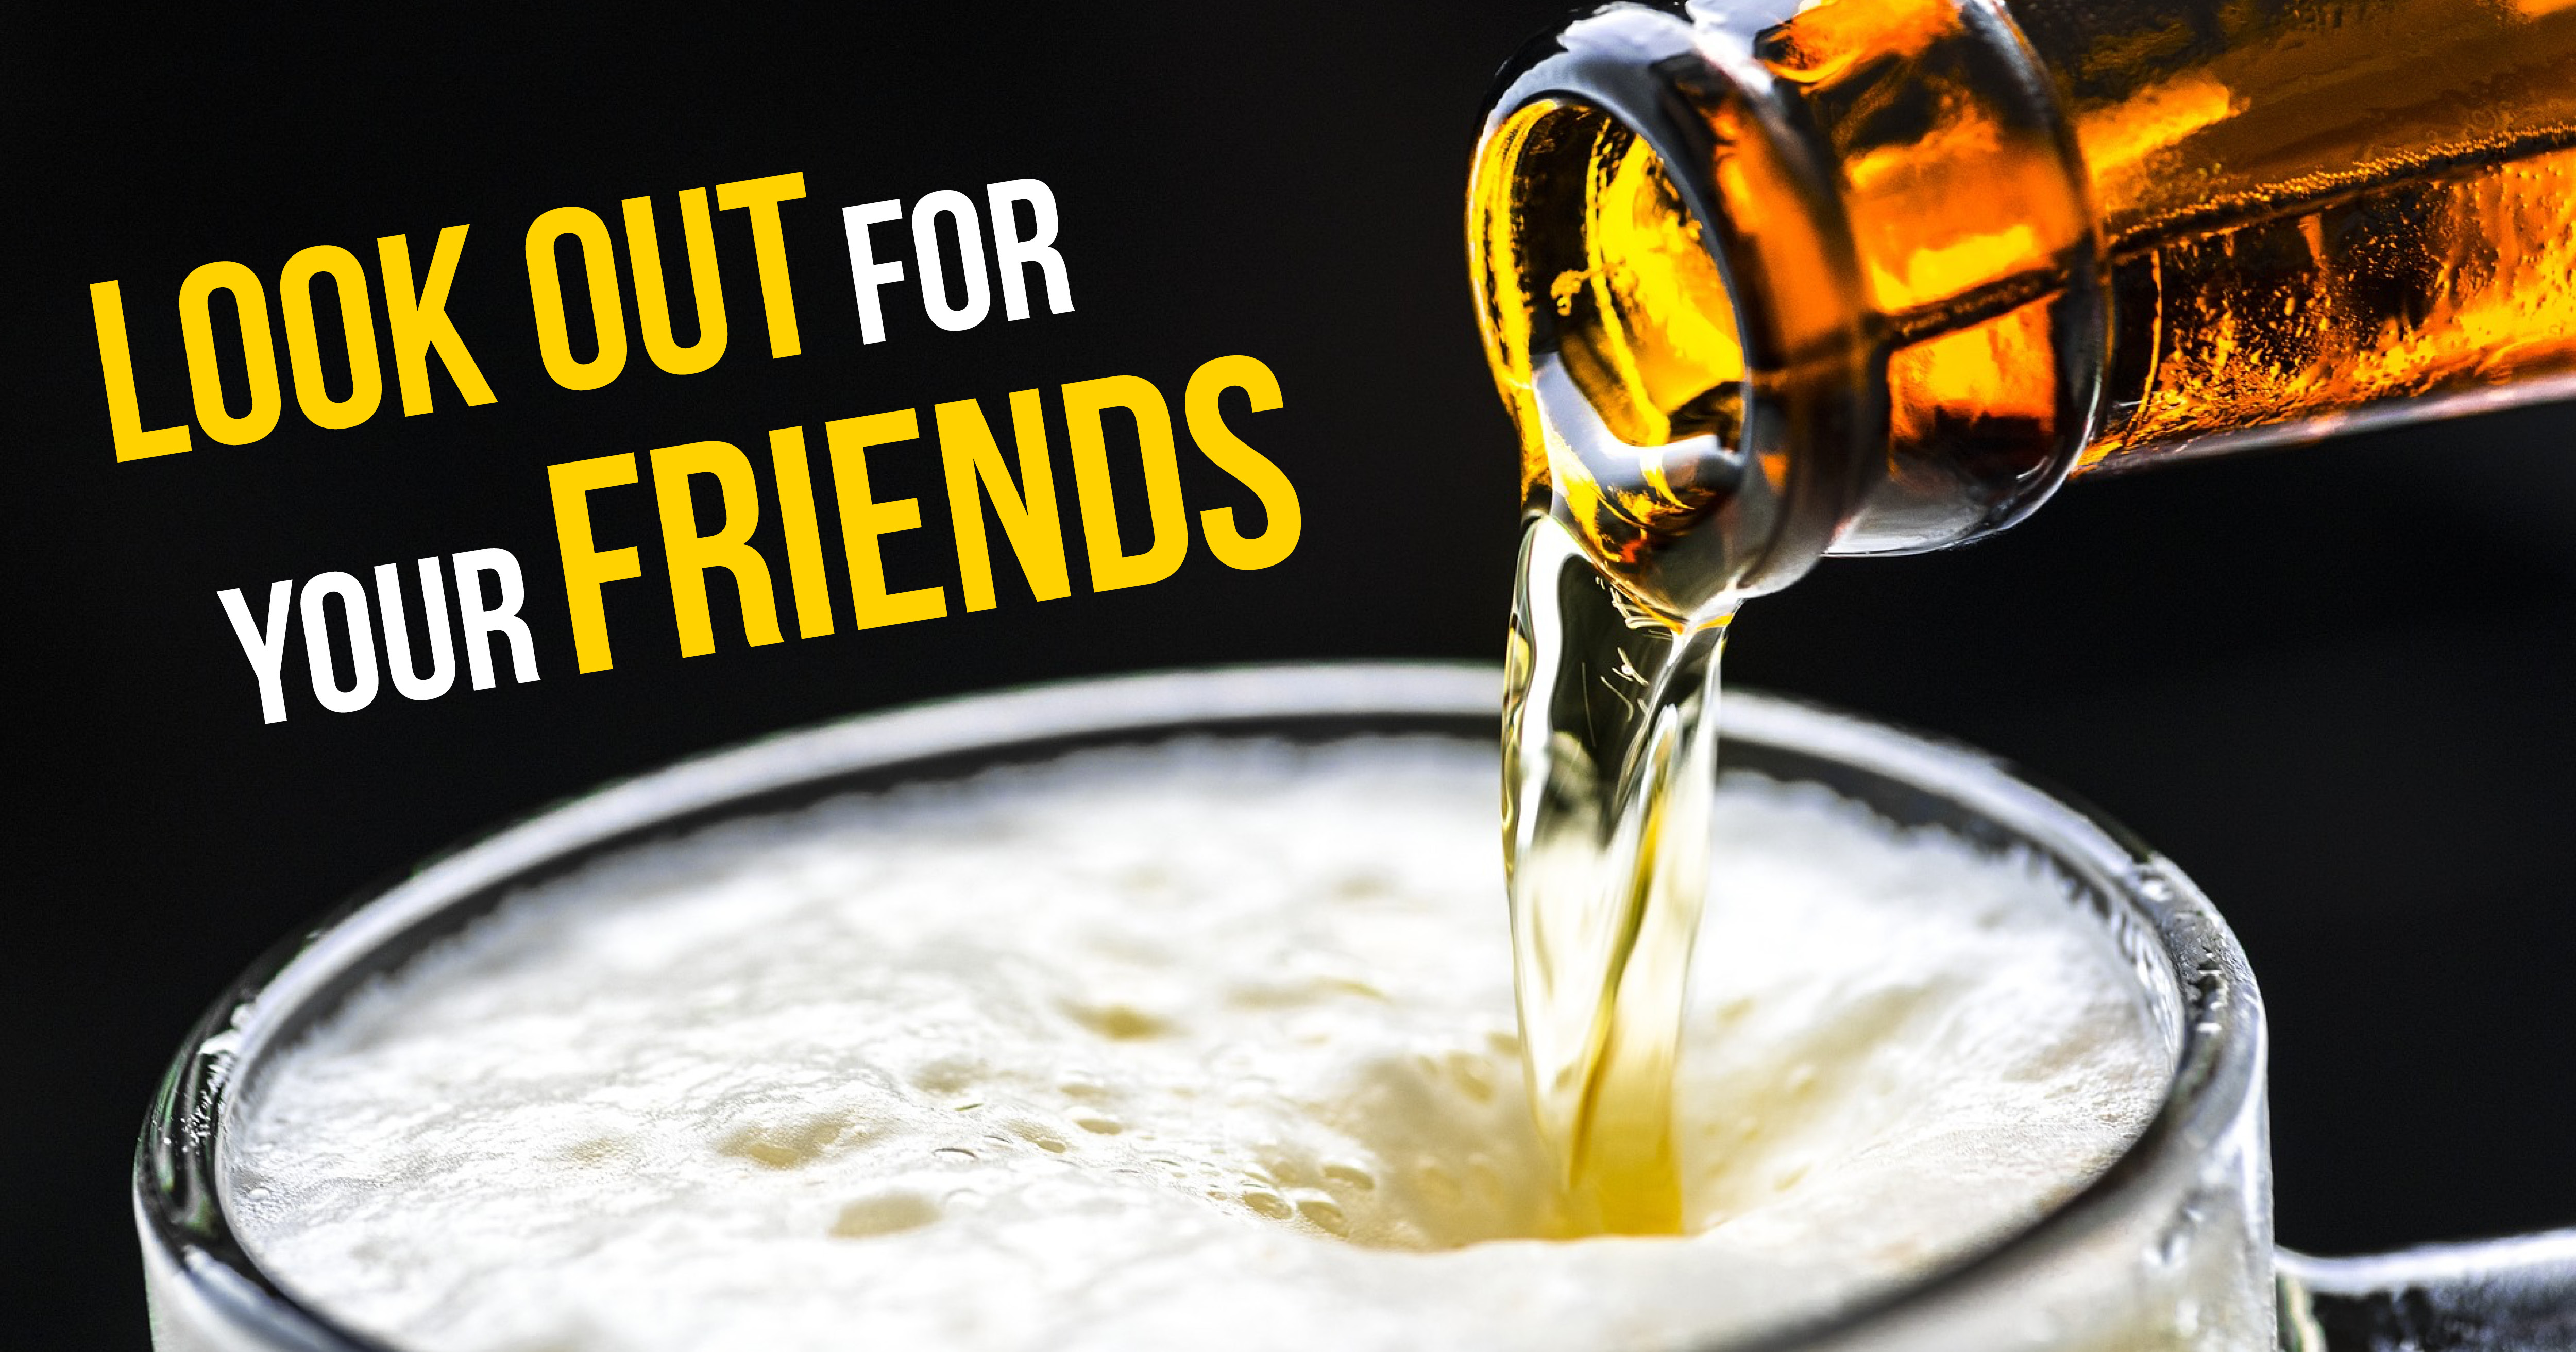 What to do if you think your friend's drink has been spiked